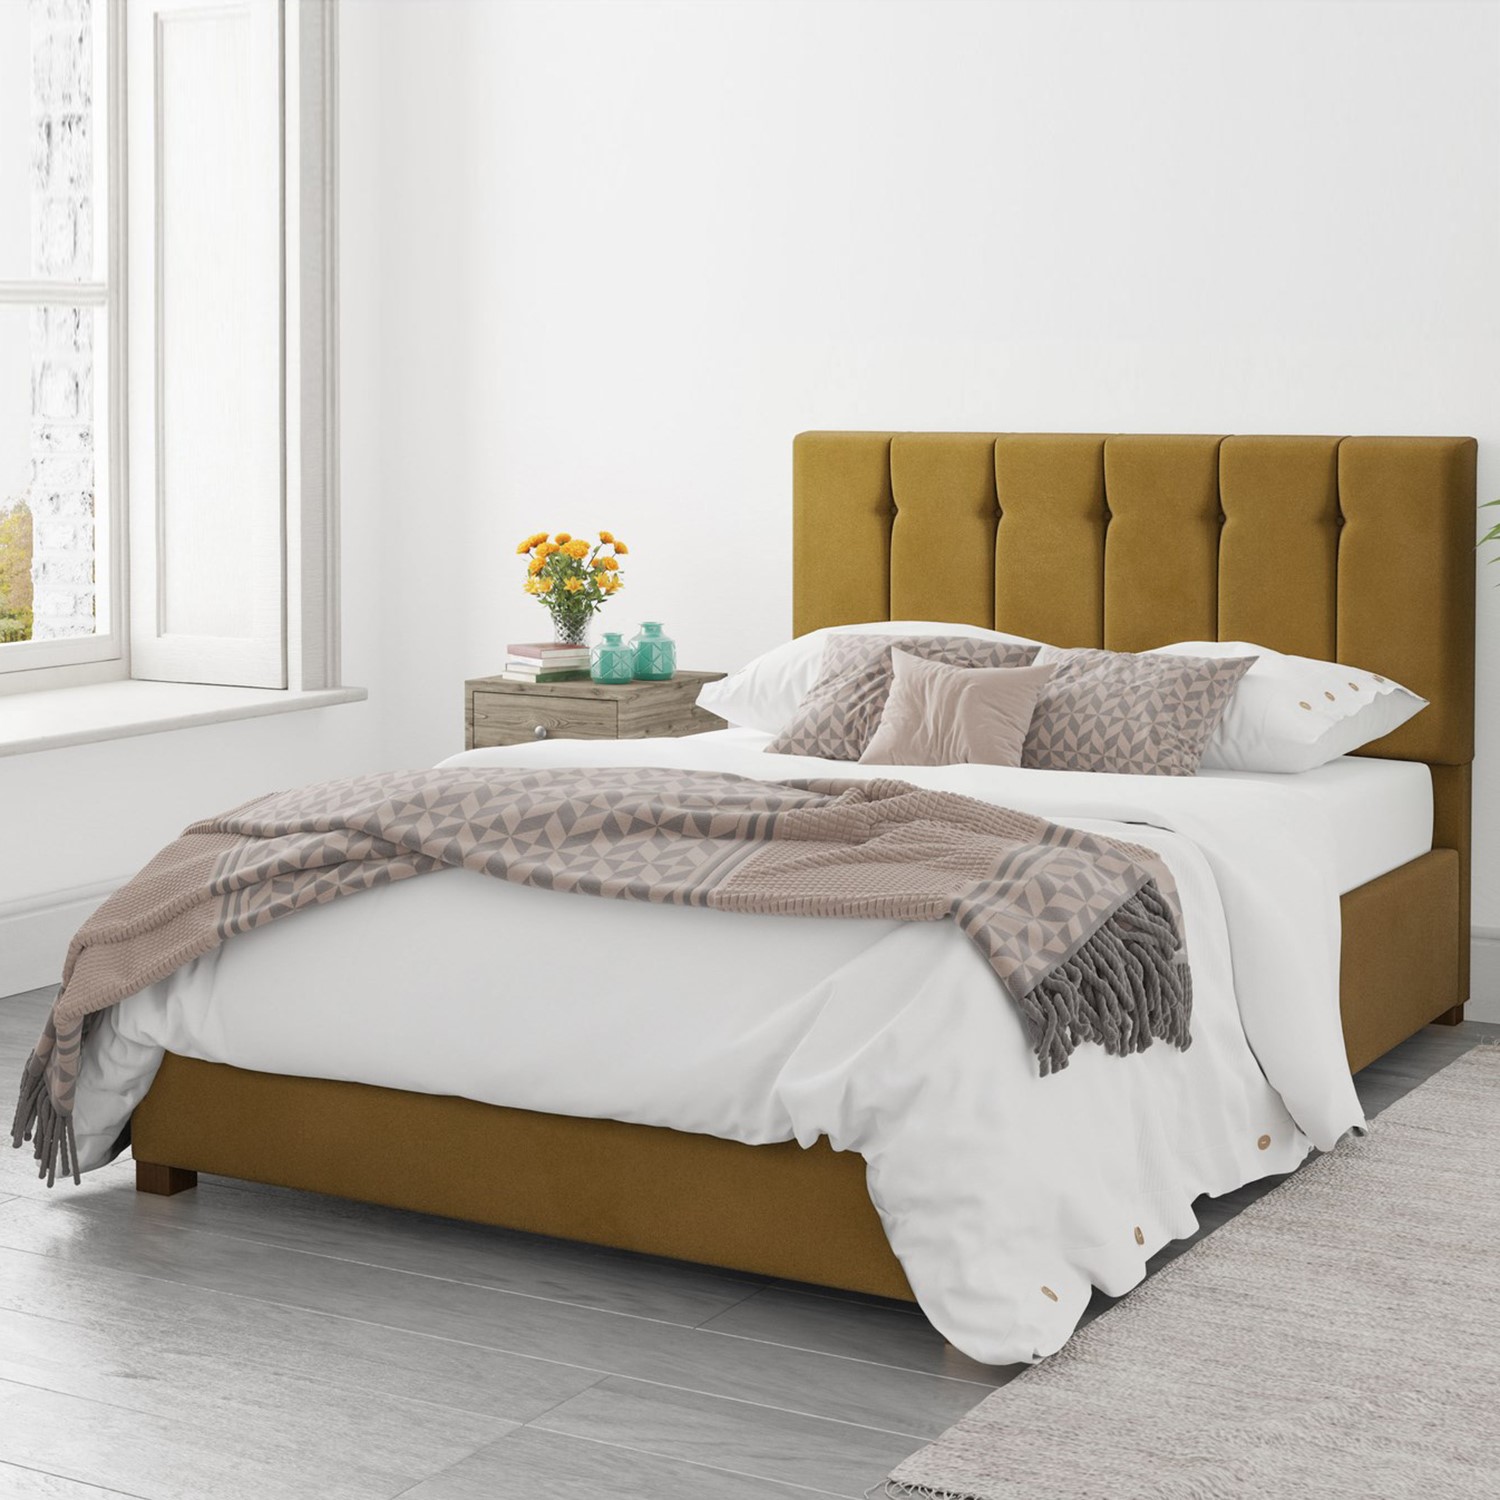 Read more about Mustard velvet king size ottoman bed pimilico aspire